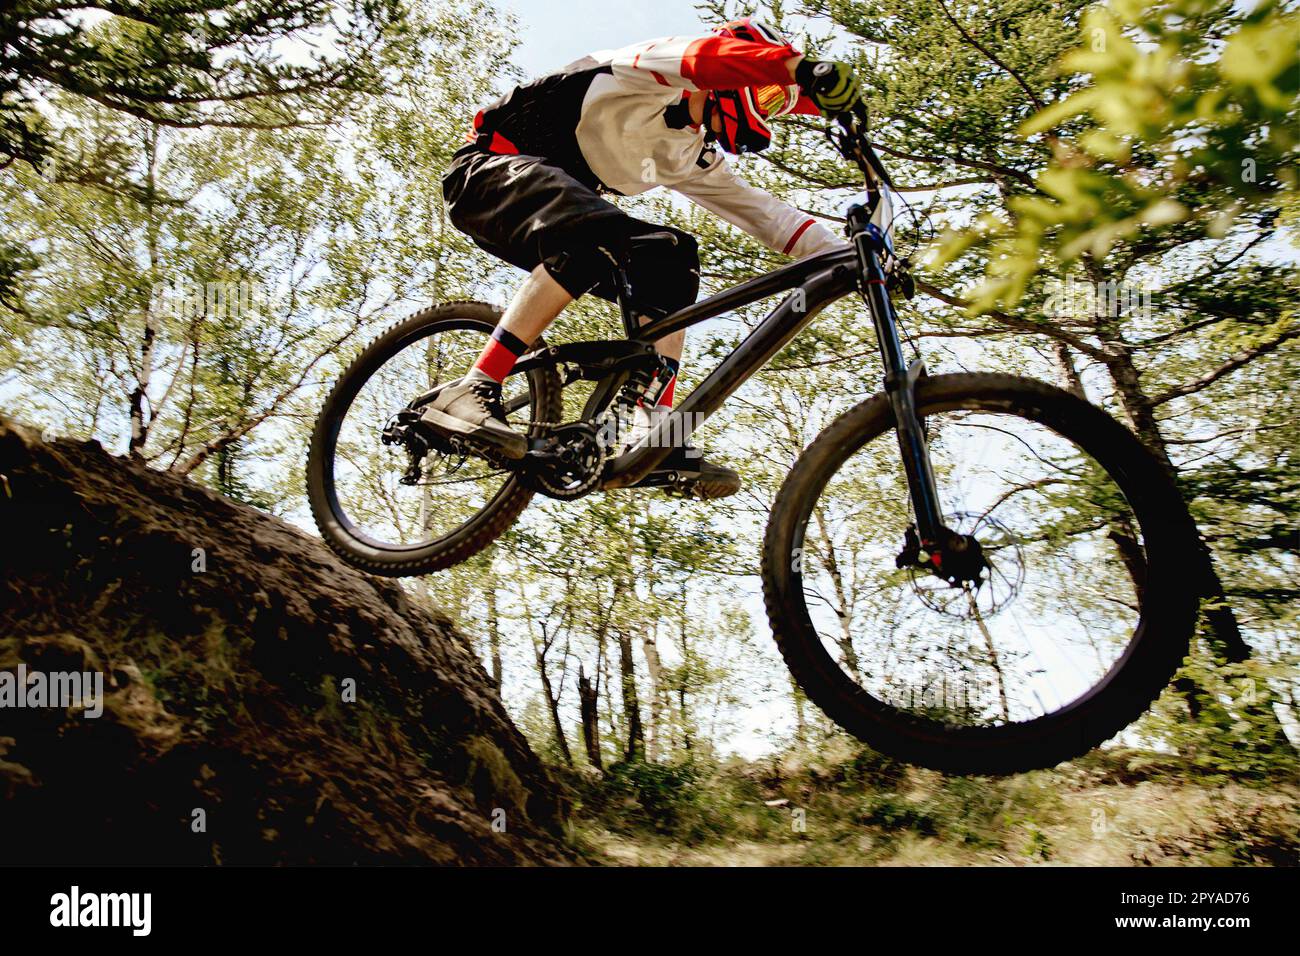 male racer cycling steep descent downhill in forest, summer mountainbike championship Stock Photo